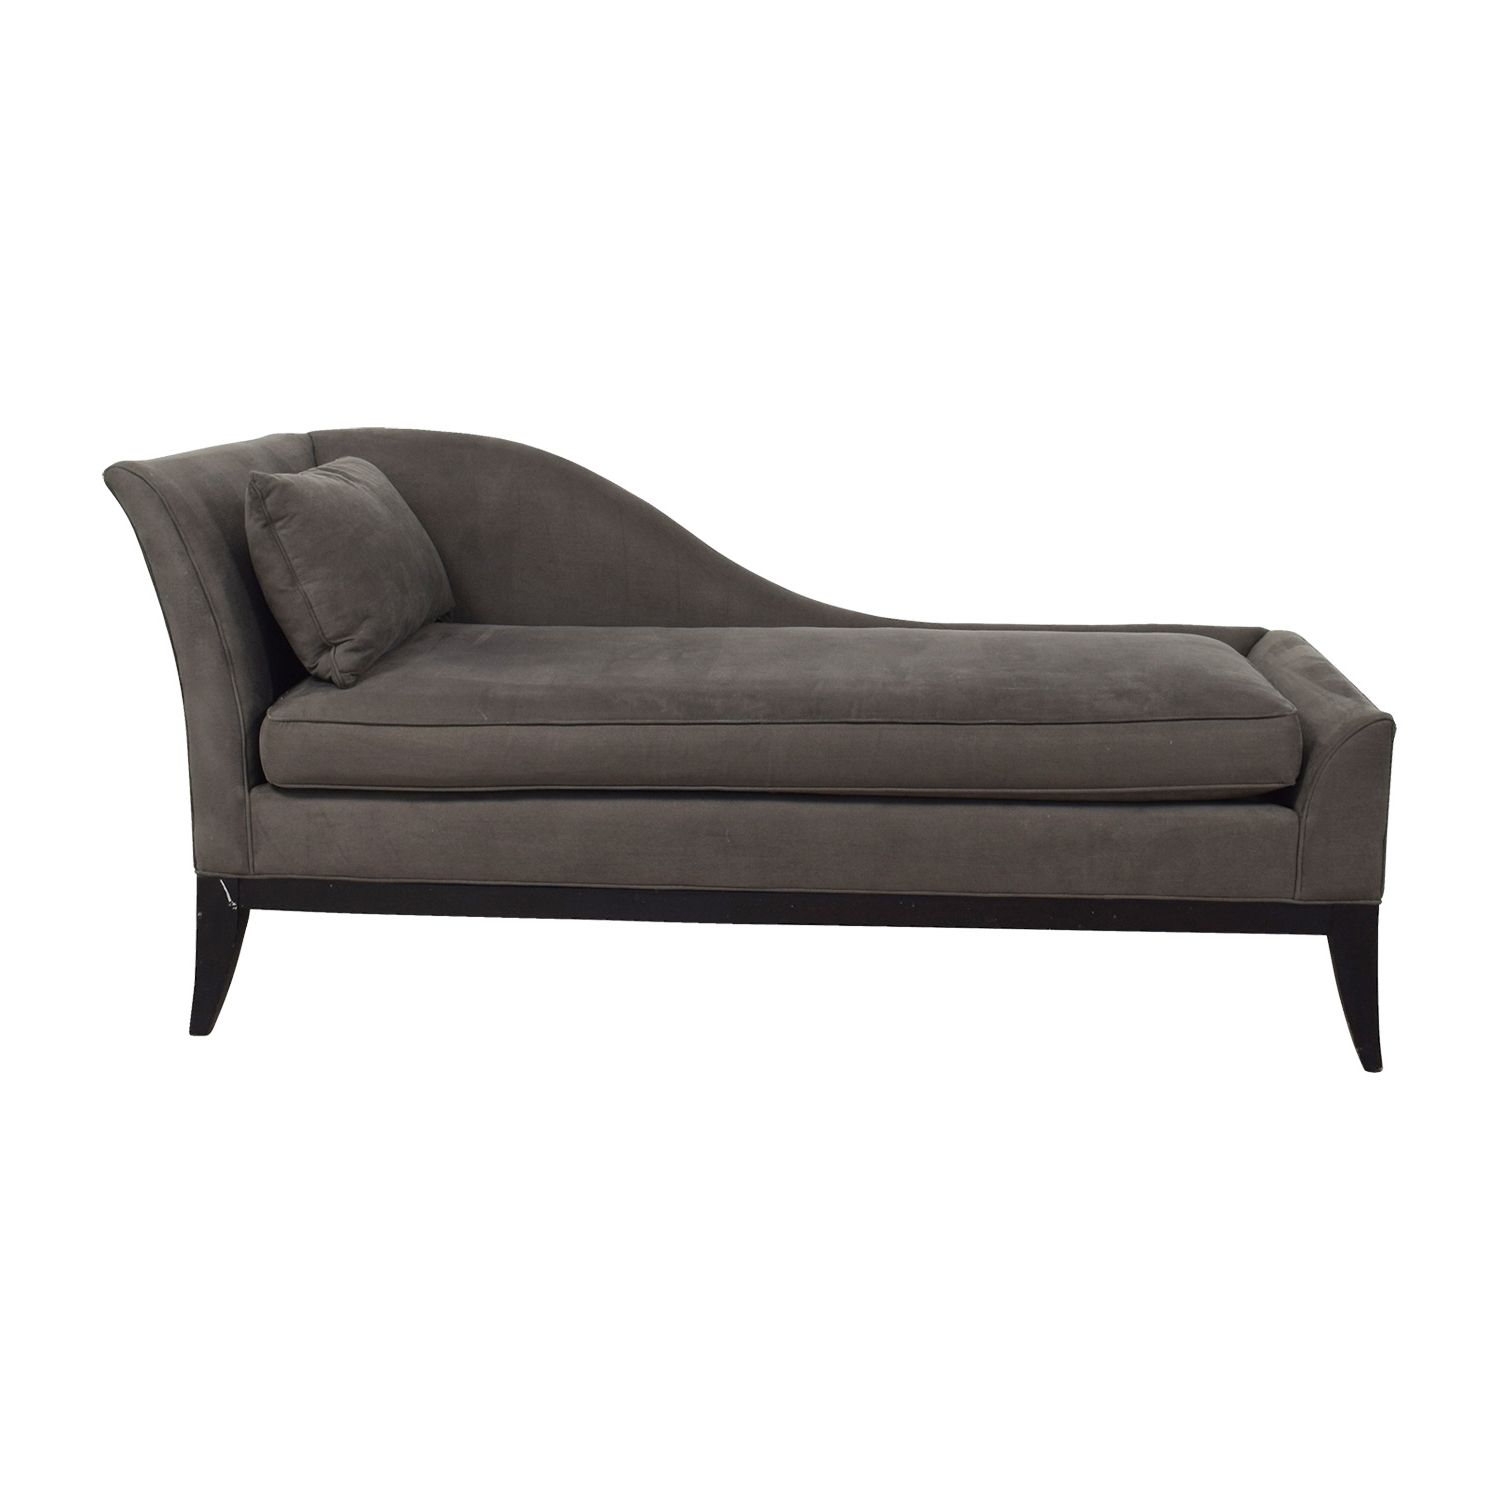 [%78% Off – Grey Chaise Lounge / Sofas Inside Preferred Grey Chaises|grey Chaises For Popular 78% Off – Grey Chaise Lounge / Sofas|most Popular Grey Chaises Within 78% Off – Grey Chaise Lounge / Sofas|recent 78% Off – Grey Chaise Lounge / Sofas Inside Grey Chaises%] (View 6 of 15)